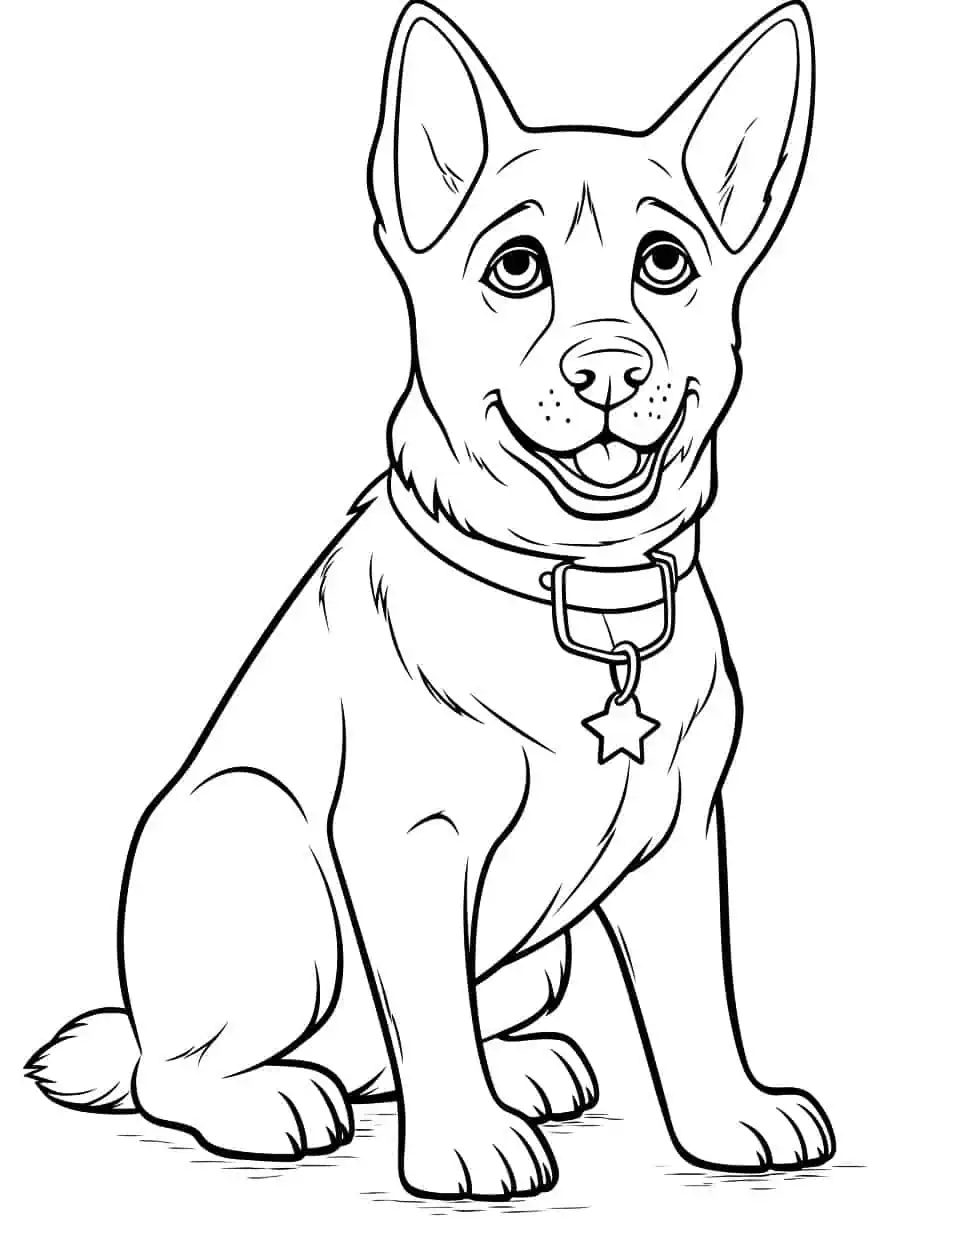 German Shepherd On Duty Dog Coloring Page - A German Shepherd serving as a police dog with a beautiful star collar.